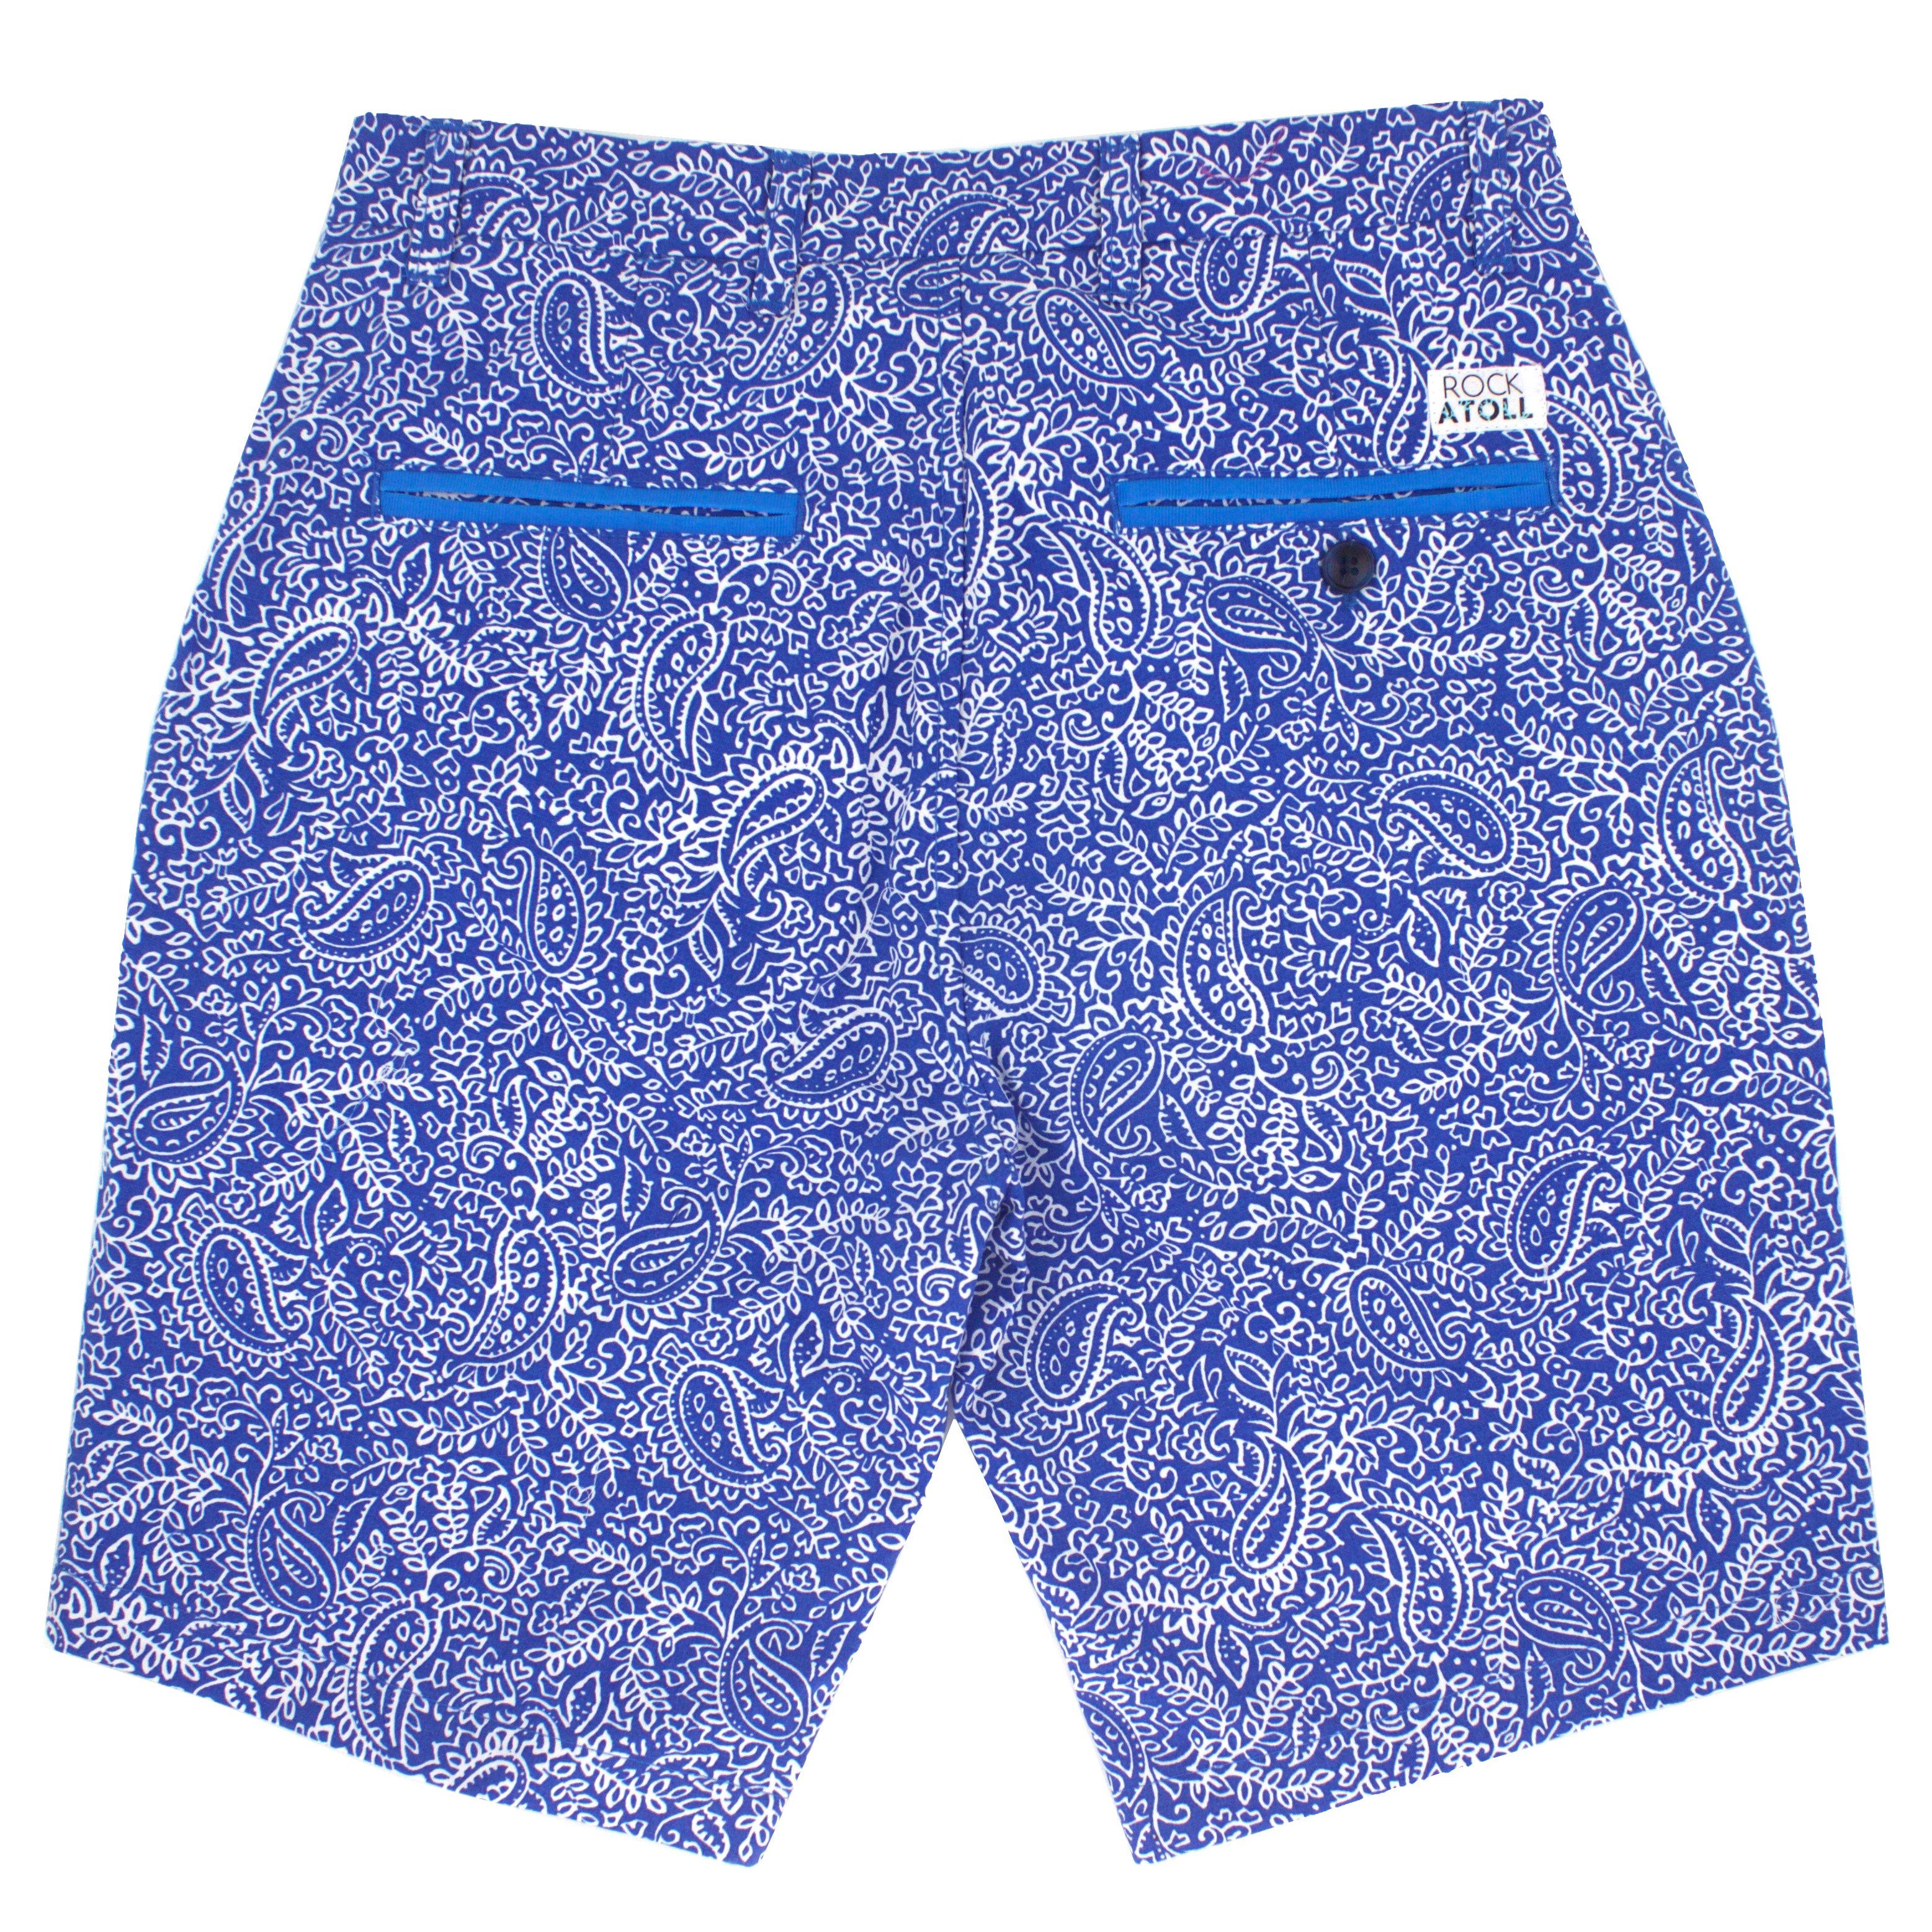 Blue Paisley All Over Print Flat Front Chino Cotton Shorts